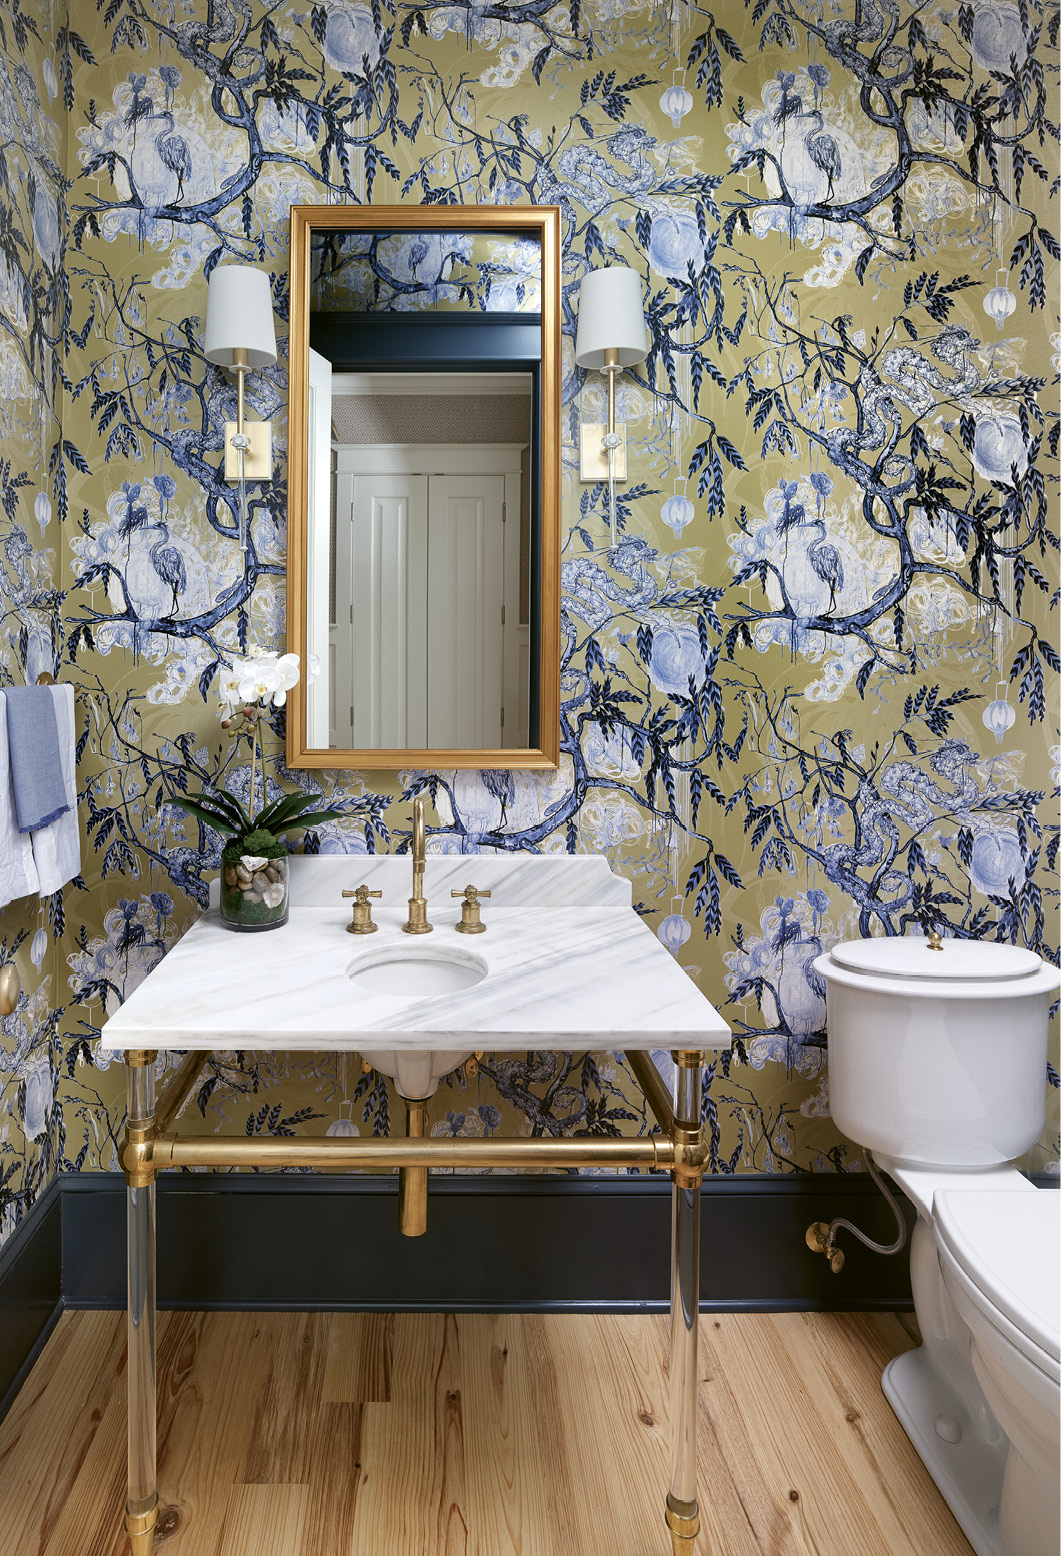 Brass and Lucite fixtures combined with Lowcountry-inspired wallpaper turn the powder room into an elegant jewel box.